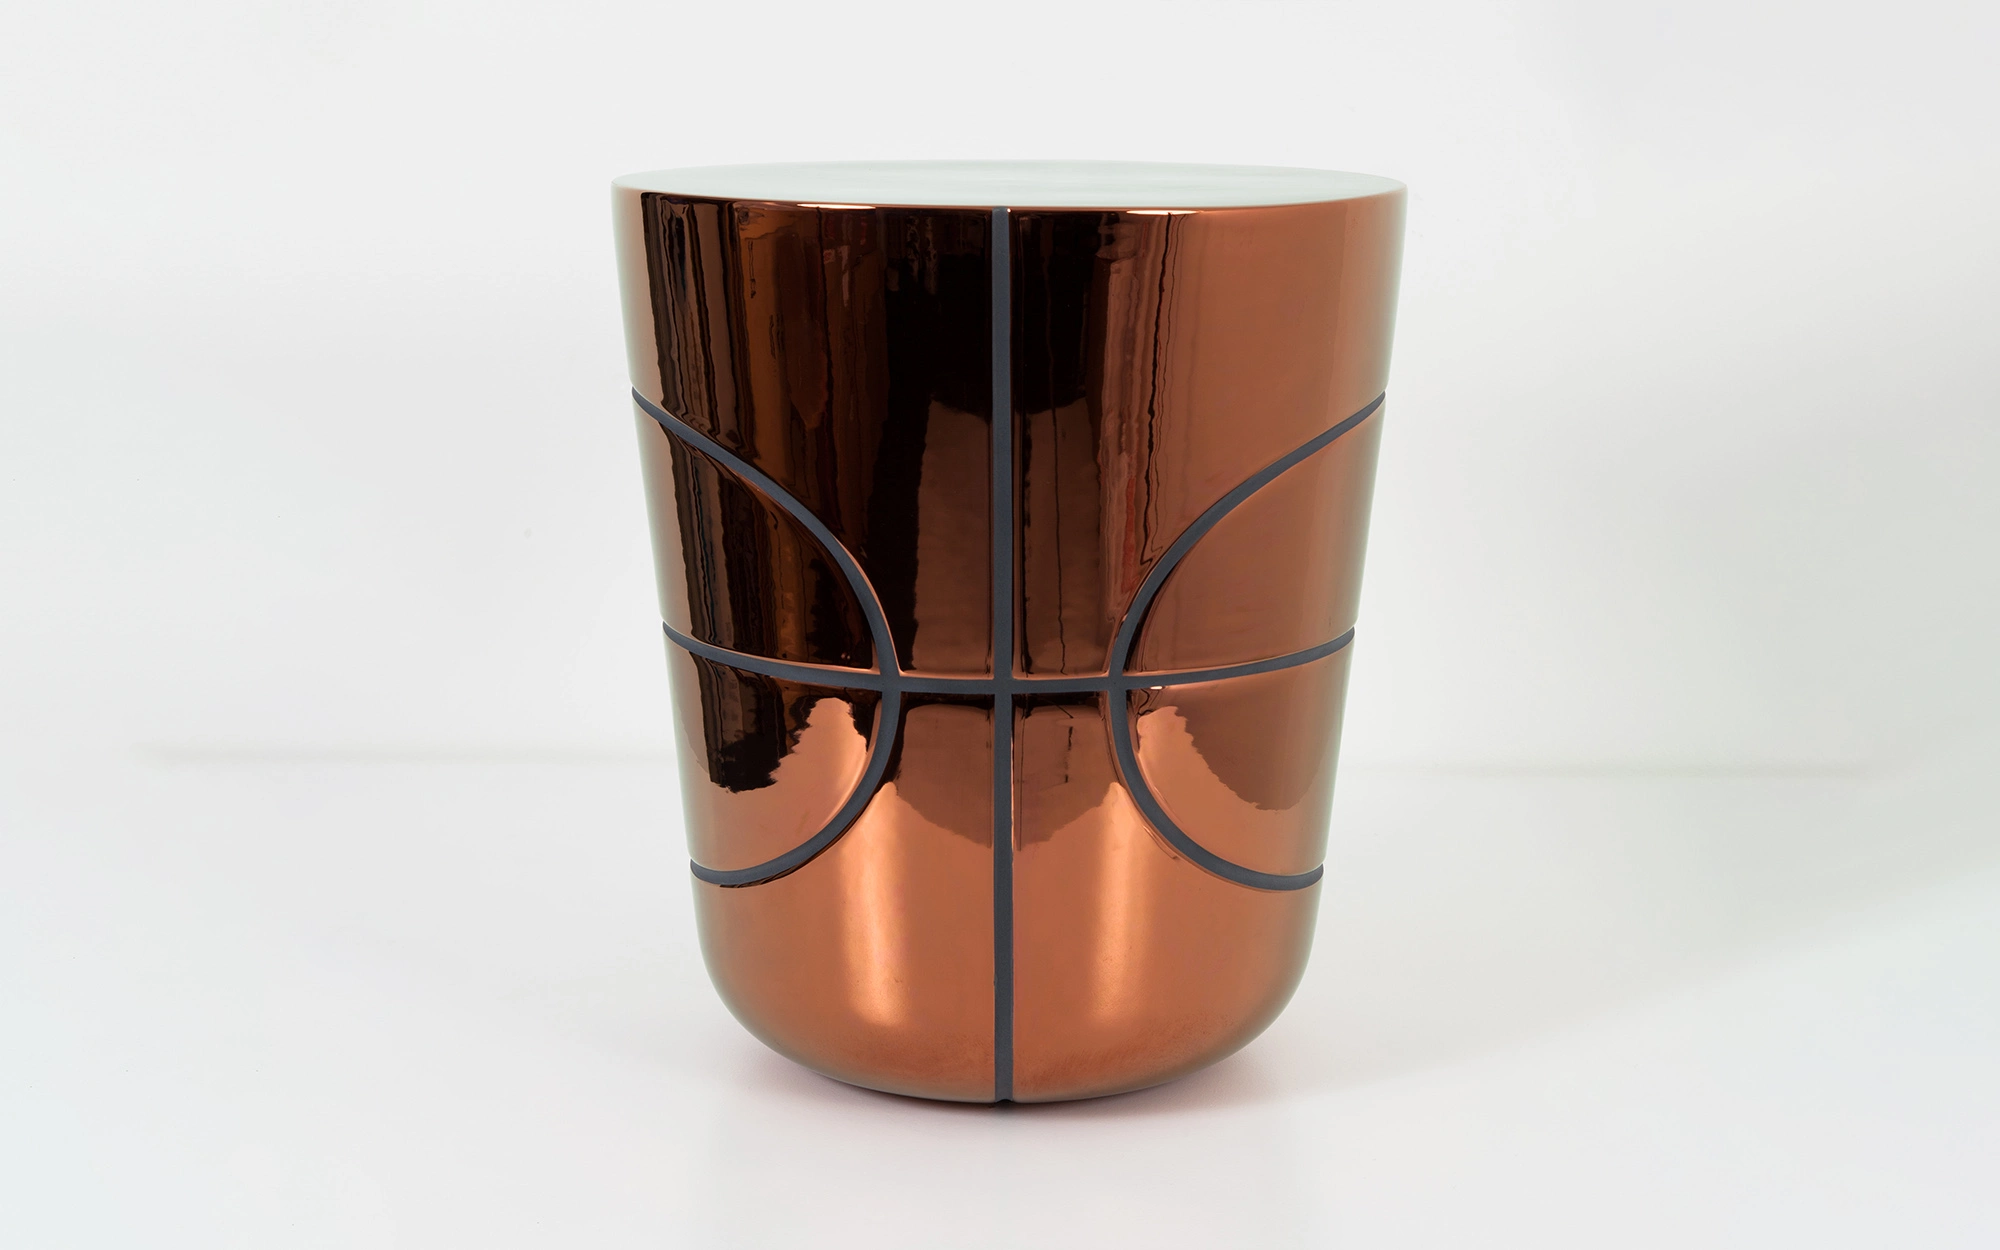 Game On Side Table - Copper Ceramic - Jaime Hayon - PAD London 2016.